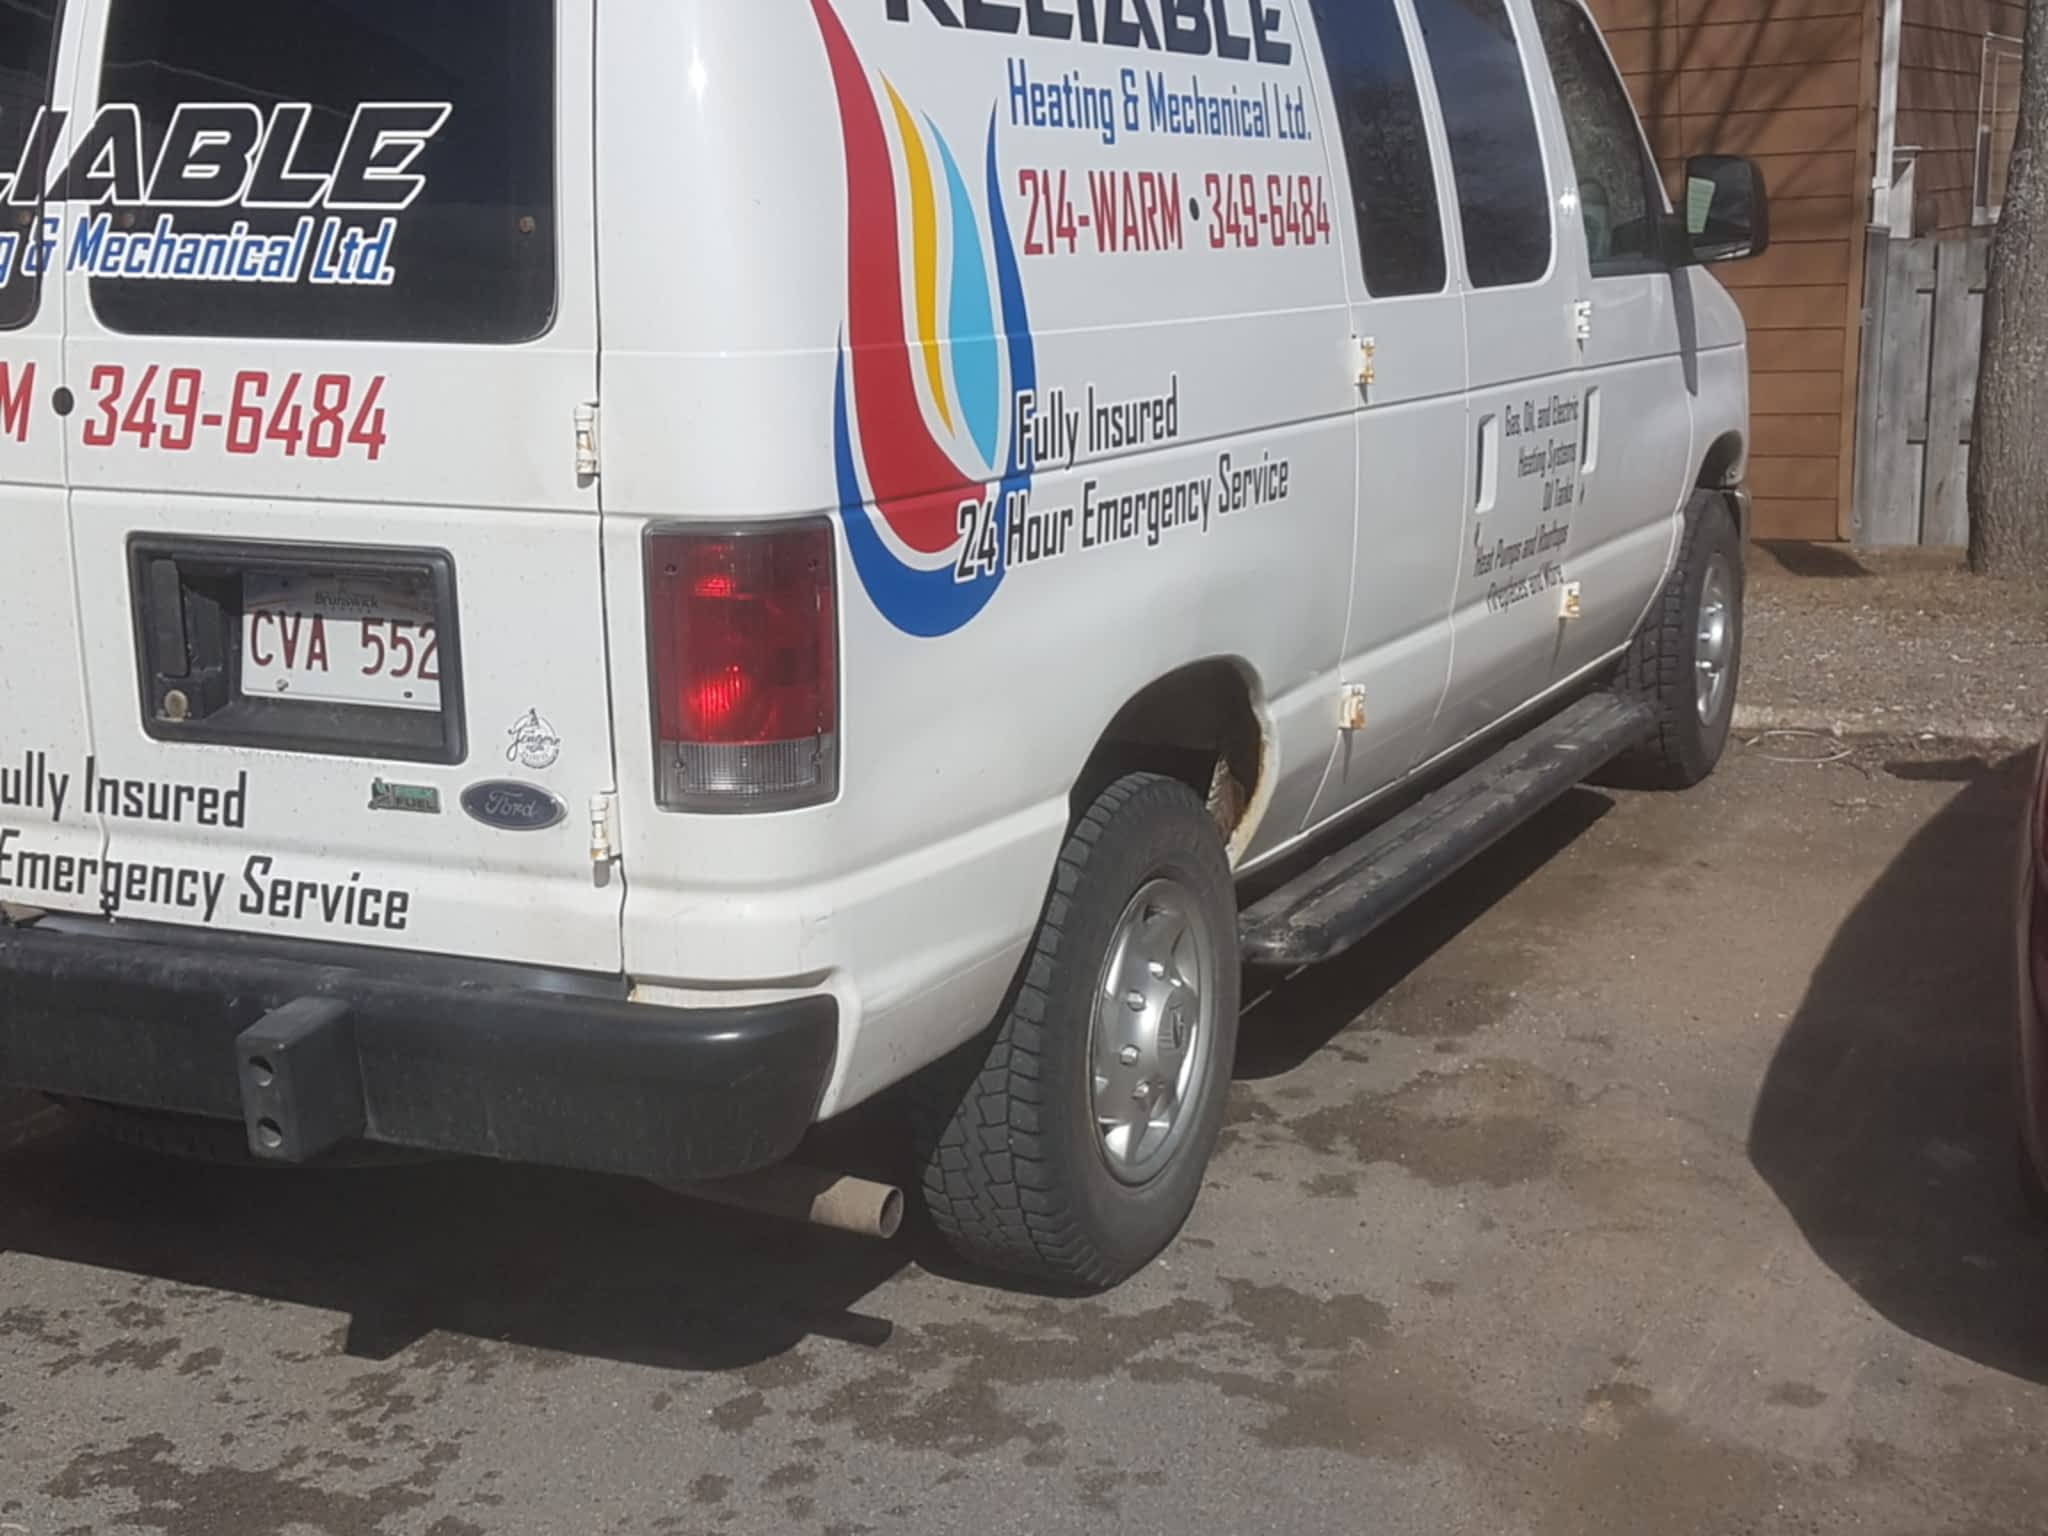 photo Reliable Heating And Mechanical Ltd